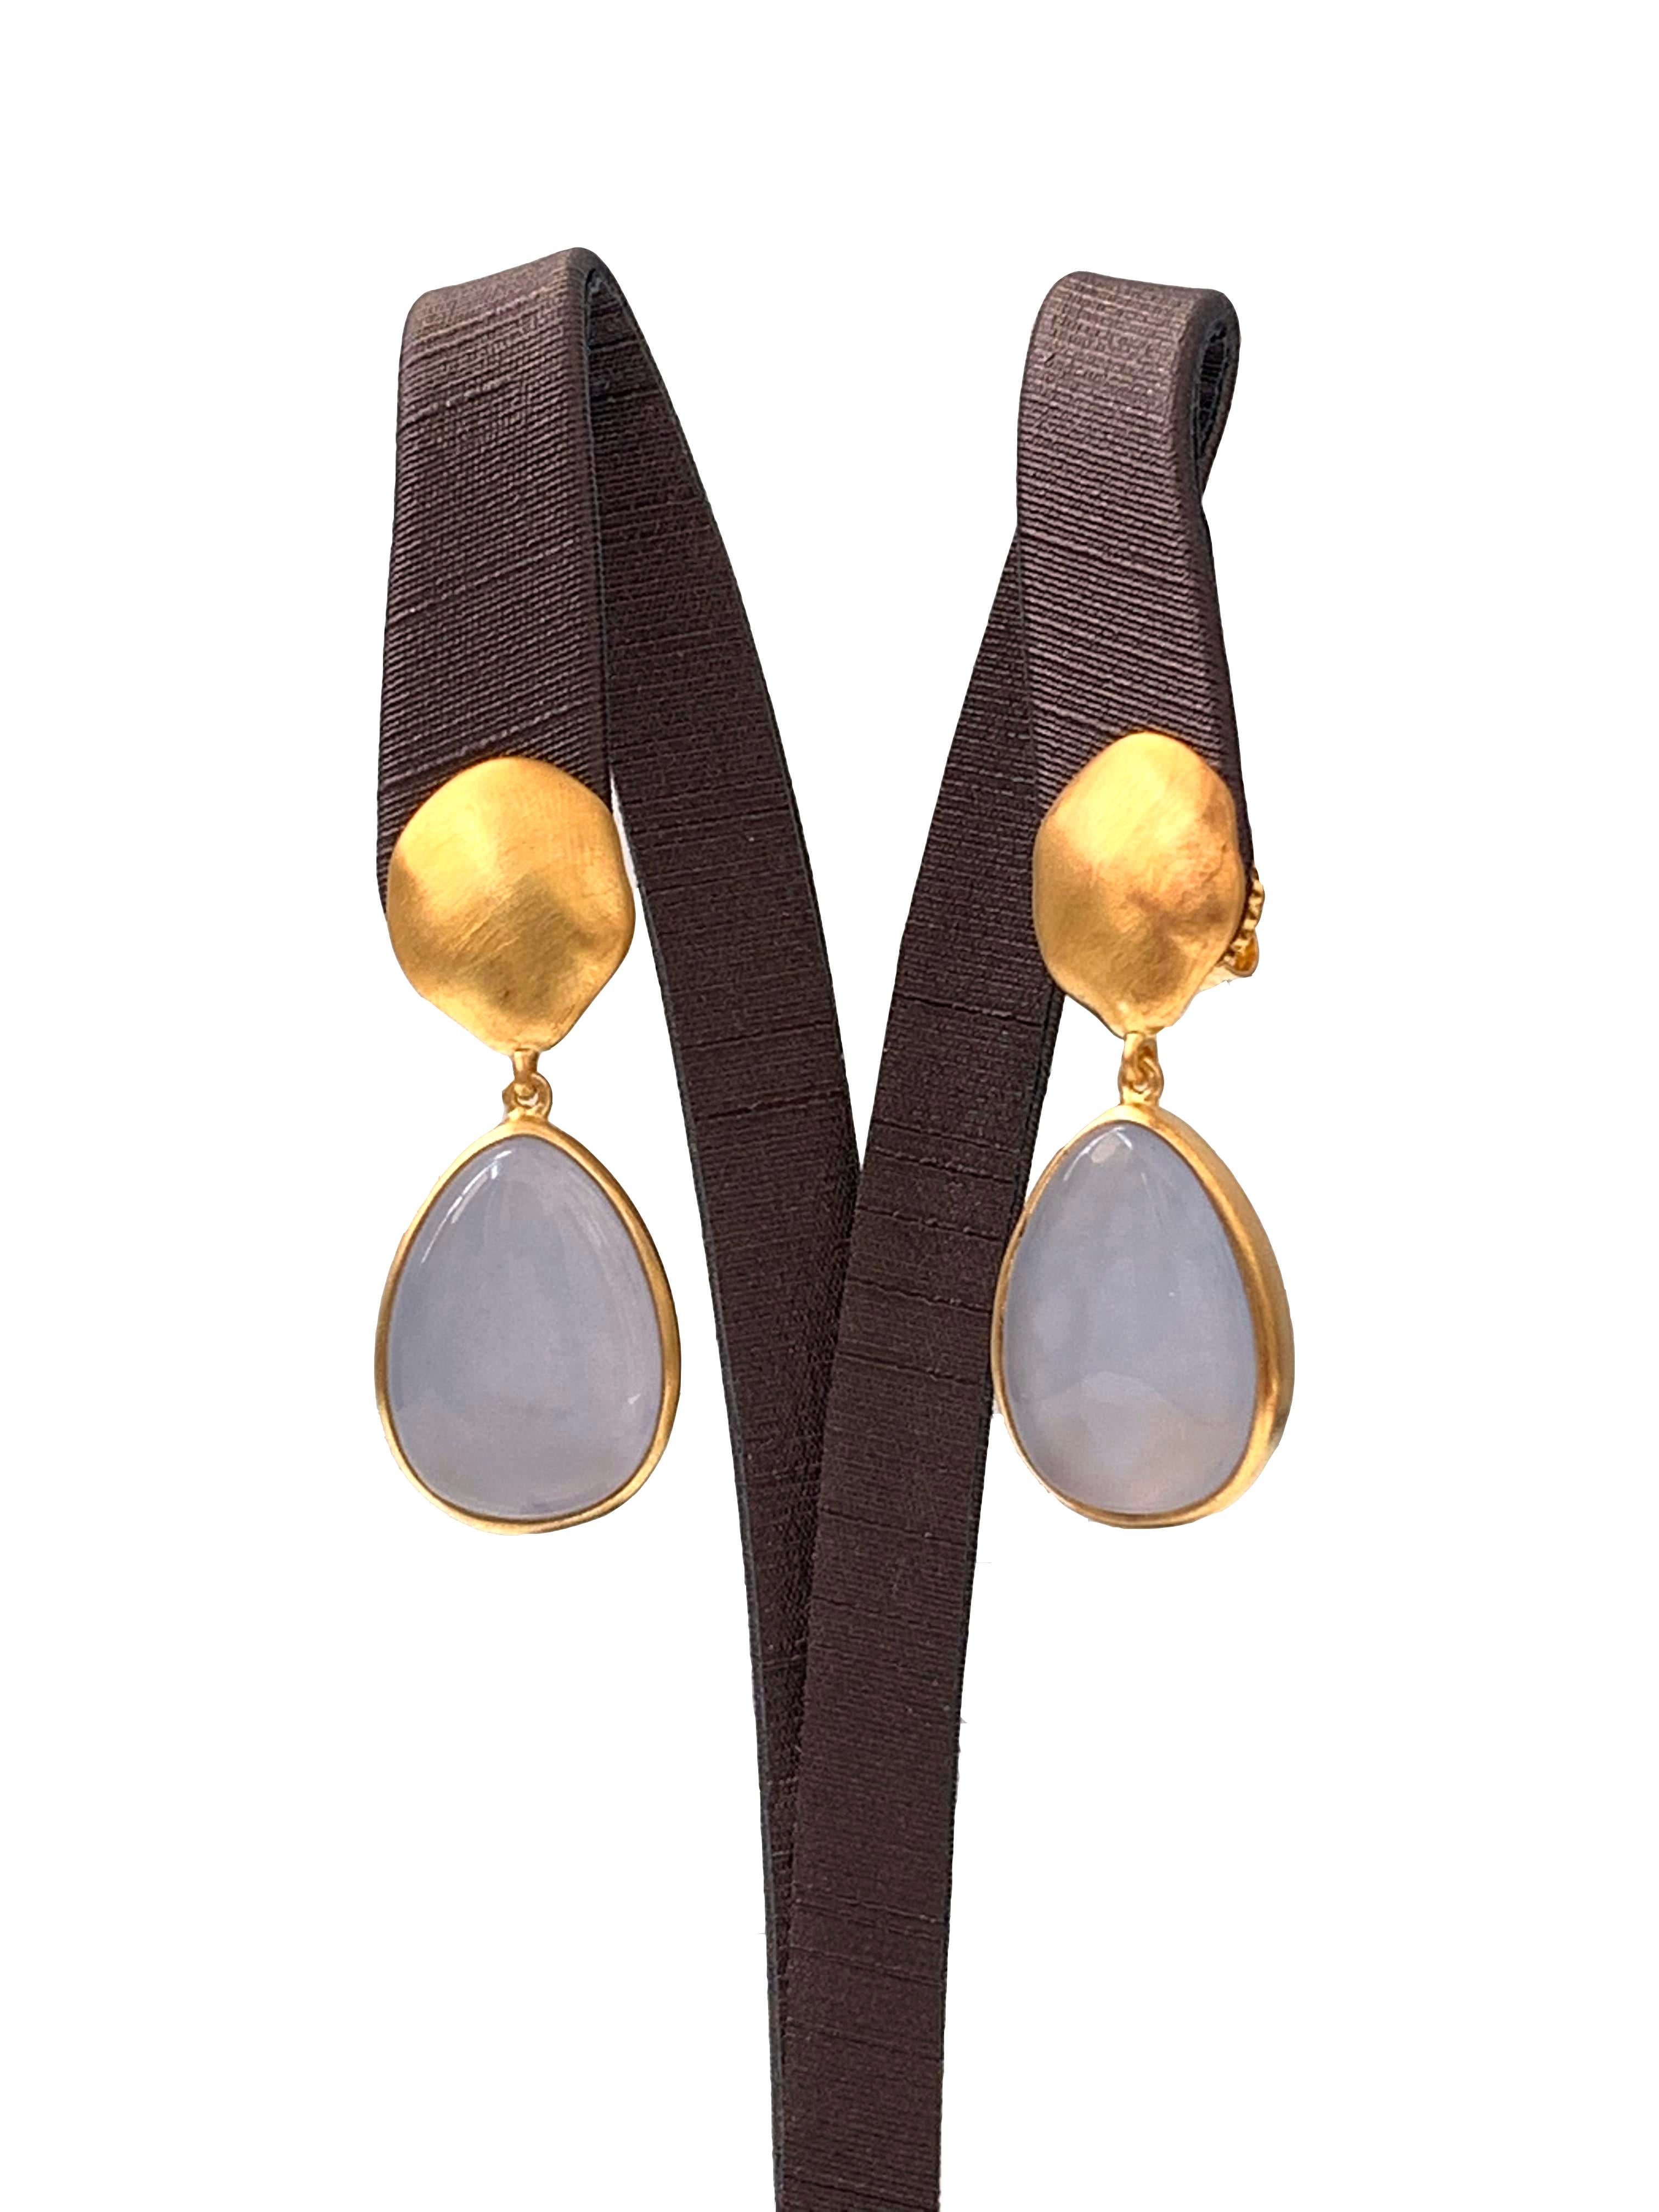 Discover pear-shape Chalcedony vermeil drop earrings. The earrings feature 2 large pear-shape cabochon-cut Chalcedony with unique periwinkle purple-ish blue hue, handcrafted brushed satin texturing technique, and hand set in vermeil 18k gold plated